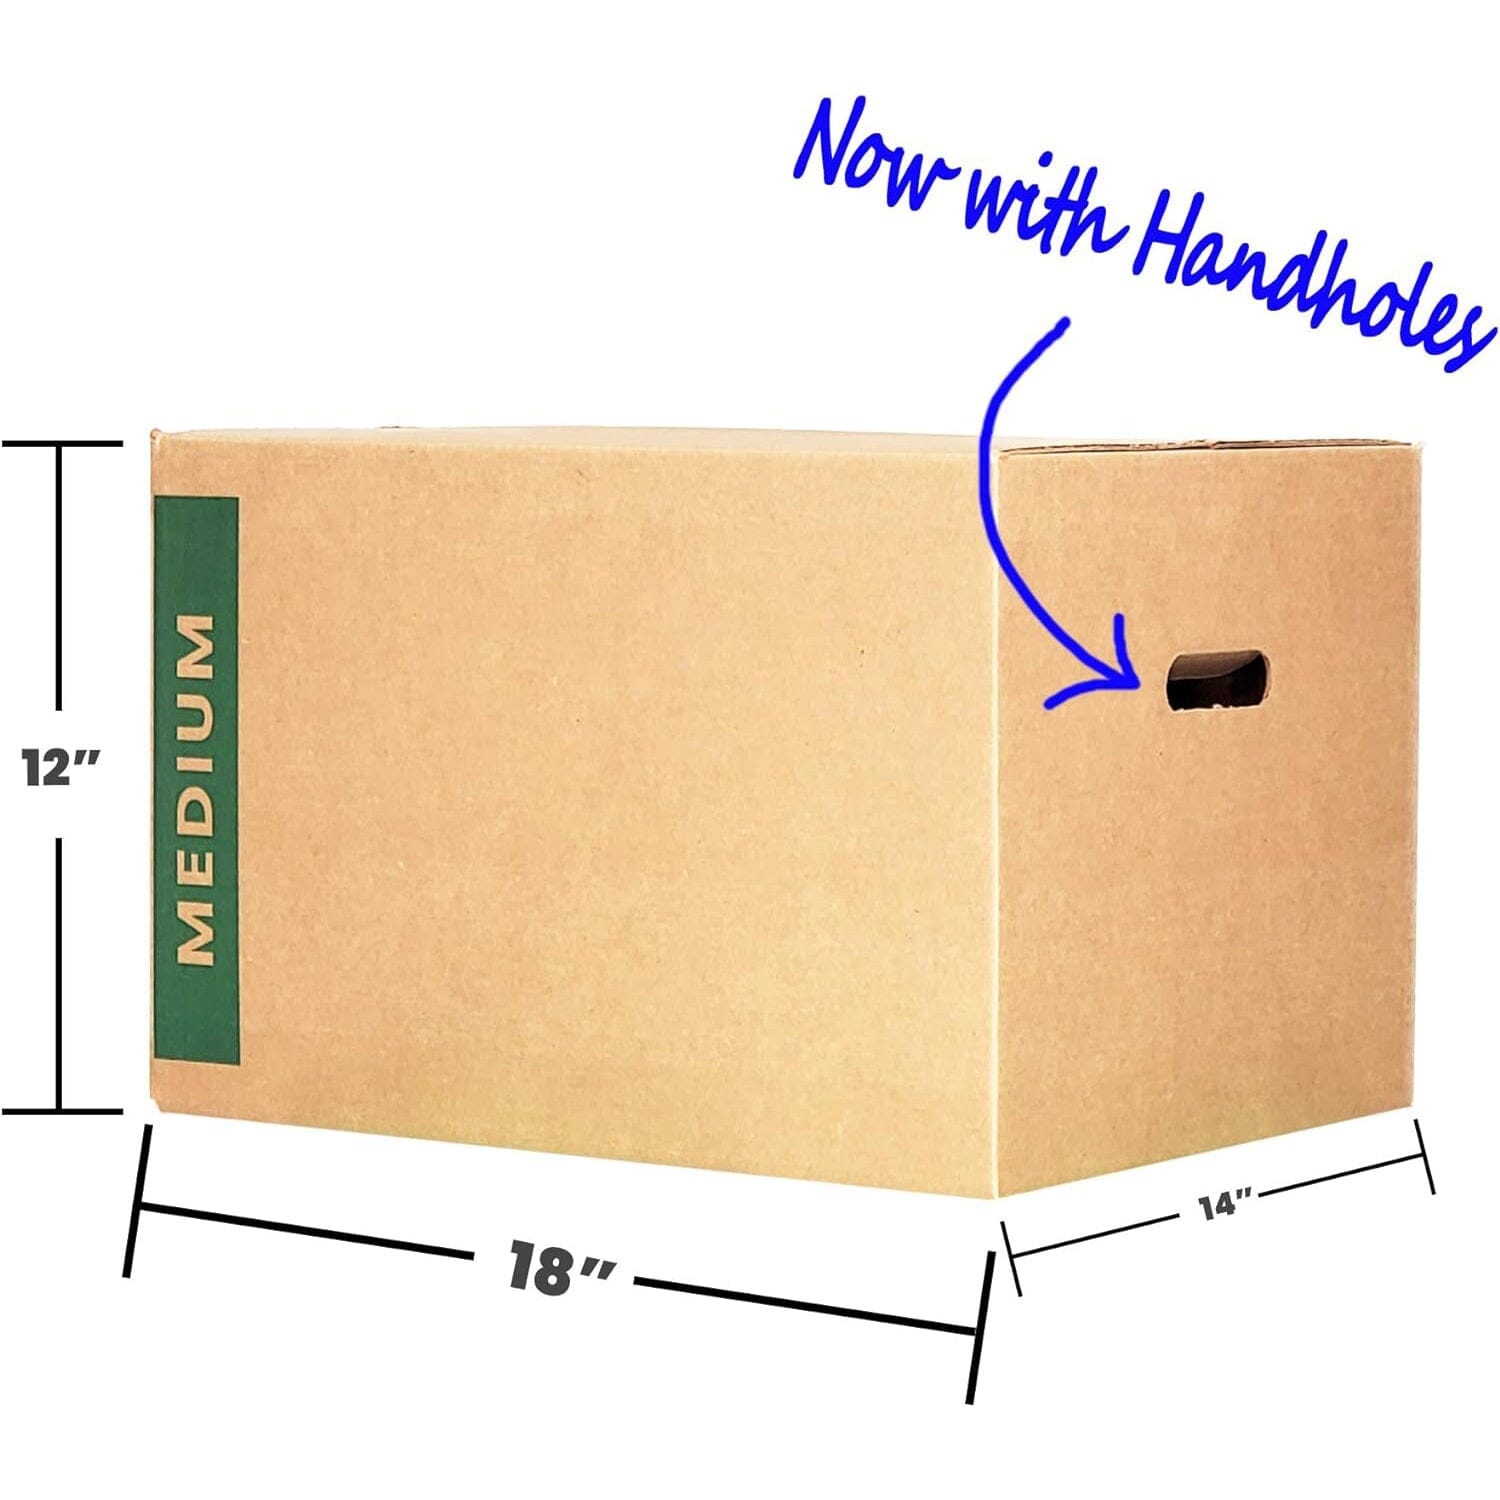 BOX USA Moving Boxes Medium 18L x 14W x 12H 10-Pack | Corrugated  Cardboard Box for Shipping, Mailing, Packing, Packaging and Storage 18x14x12